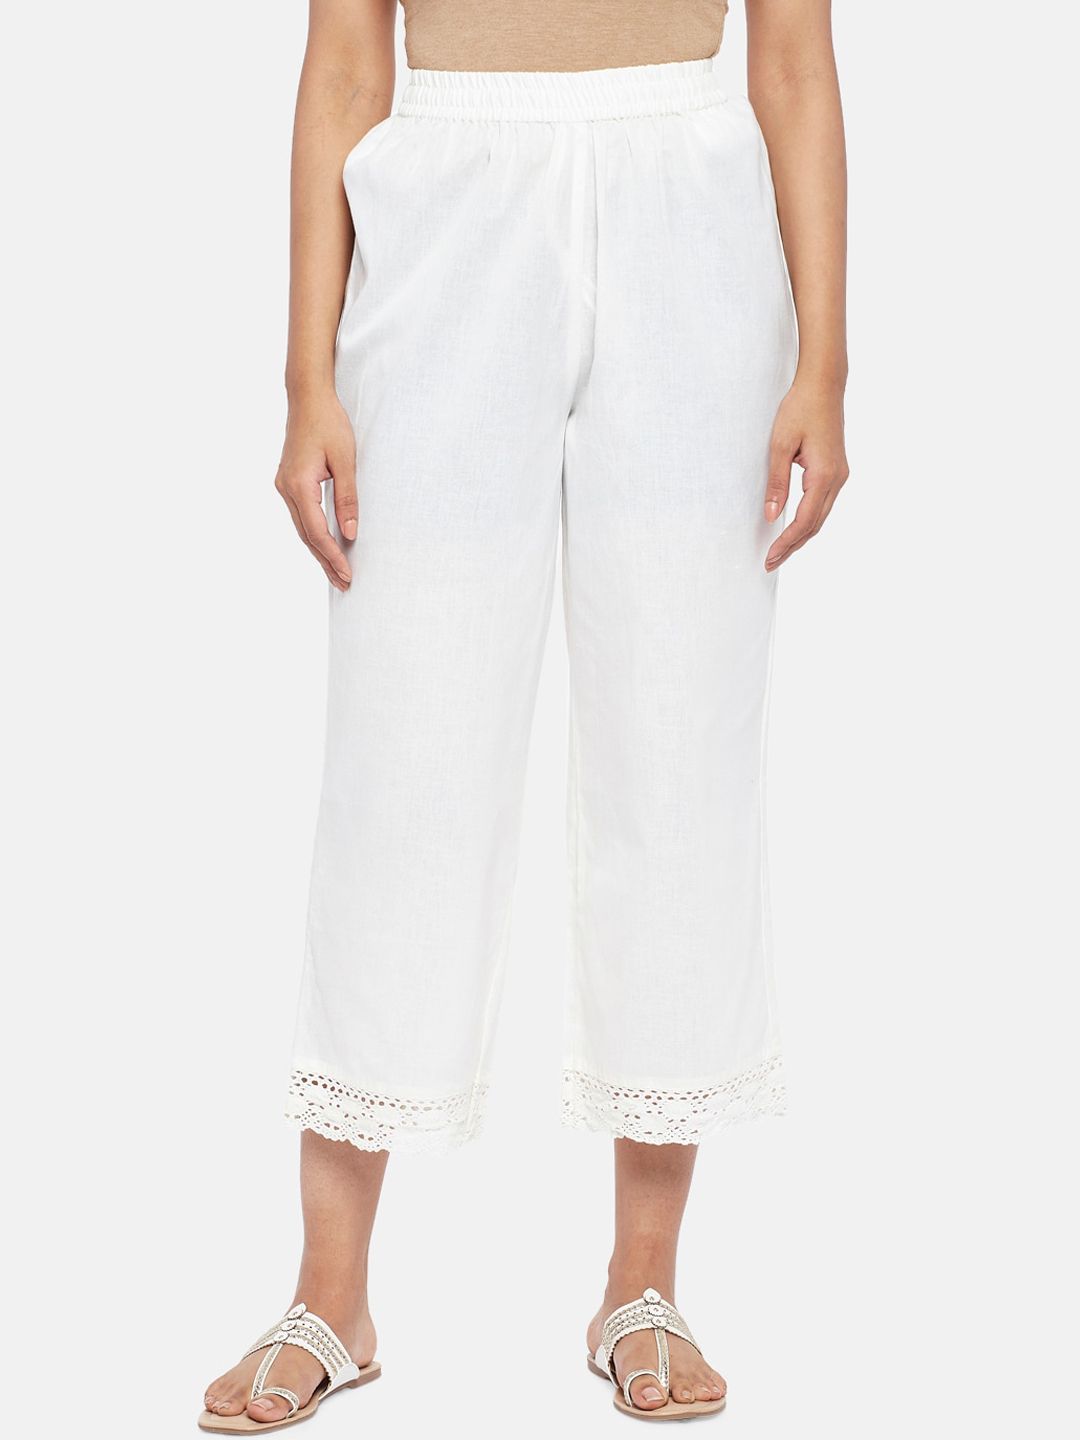 RANGMANCH BY PANTALOONS Women Off White Culottes Trousers Price in India